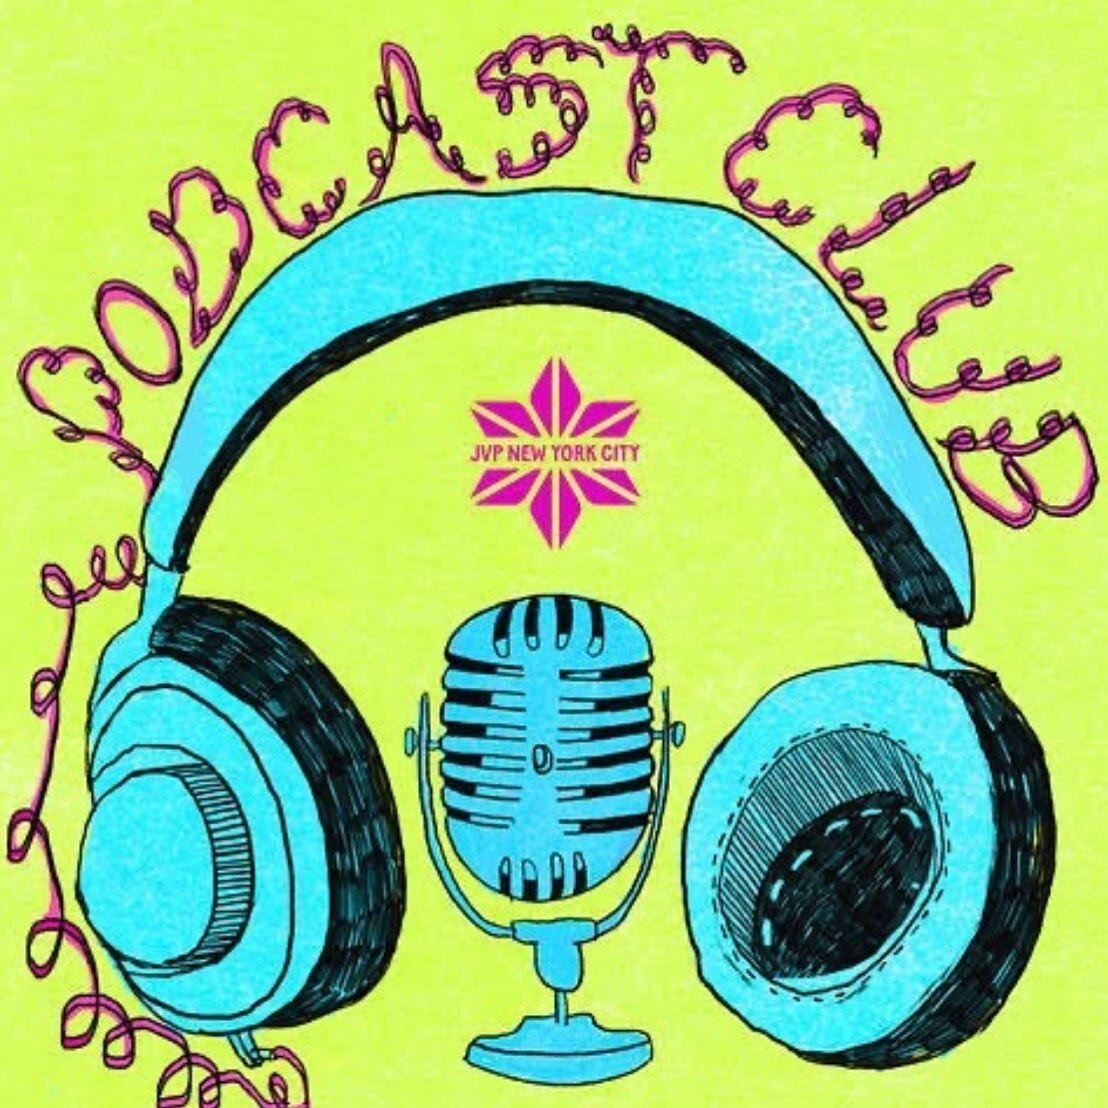 Join us this Sunday, January 17th at 4:00 pm for the final gathering of Pod Club! We&rsquo;ll be hearing from Tallie Ben Daniel and Nava EtShalom, the creators of the @jewishvoiceforpeace Diaspora Podcast. All are welcome, regardless of whether you&r